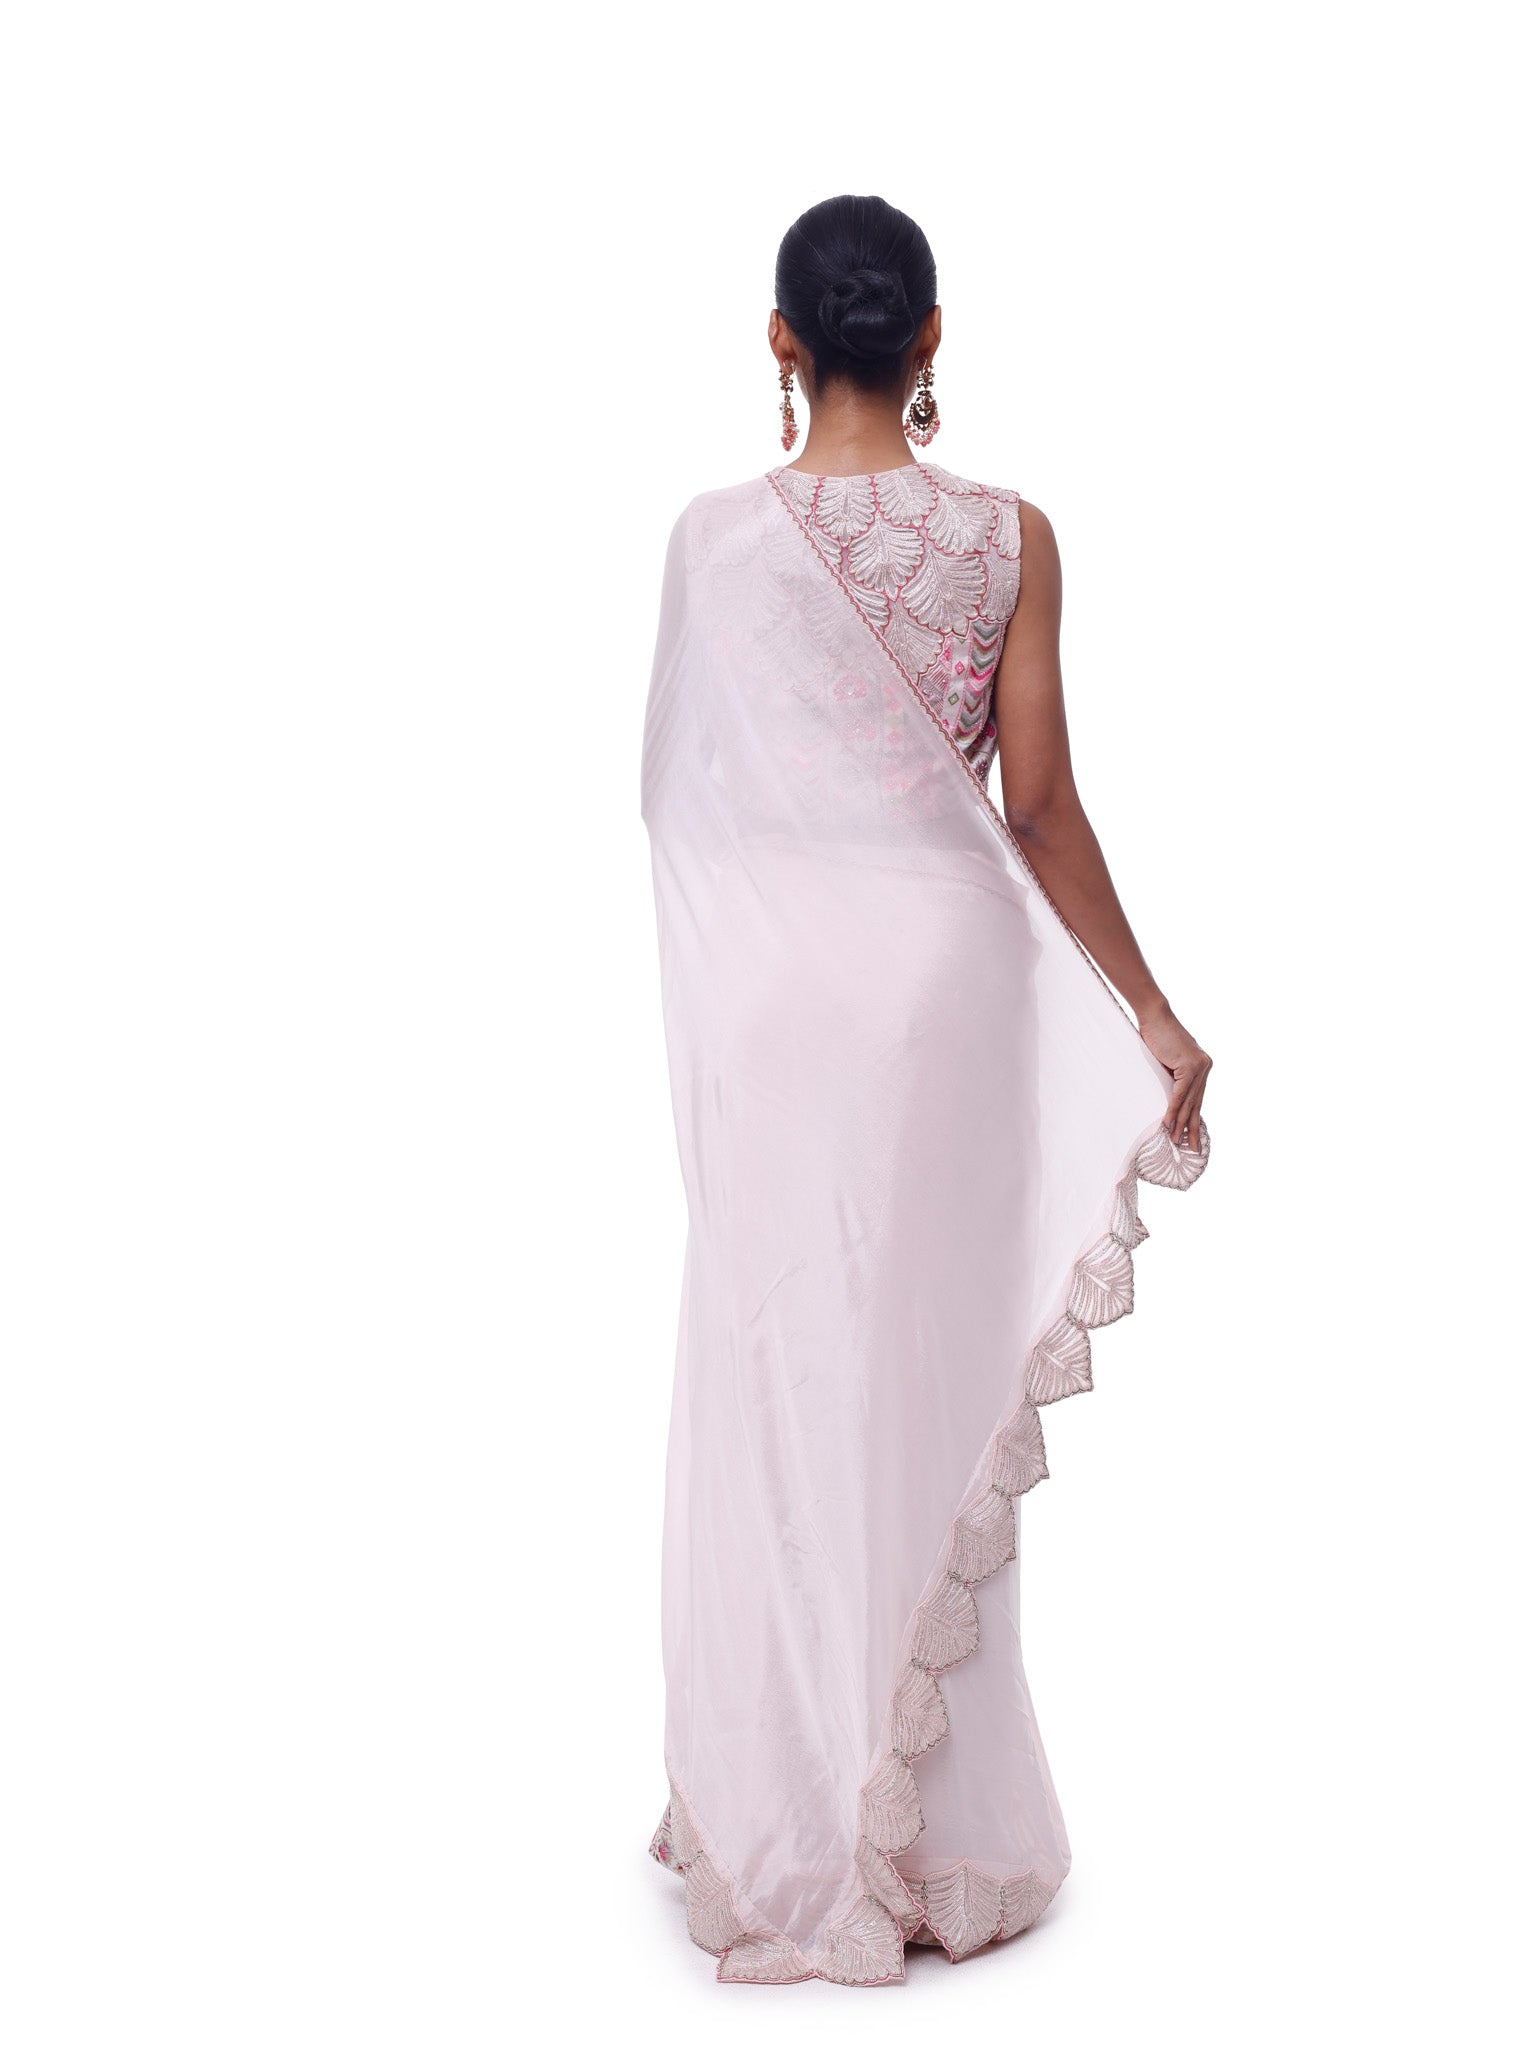 Buy powder pink chiffon saree online in USA with scalloped border and embroidered blouse. Look like a royalty in exquisite designer sarees, embroidered sarees, handwoven sarees, pure silk saris, Banarasi sarees, Kanjivaram sarees from Pure Elegance Indian saree store in USA.-back